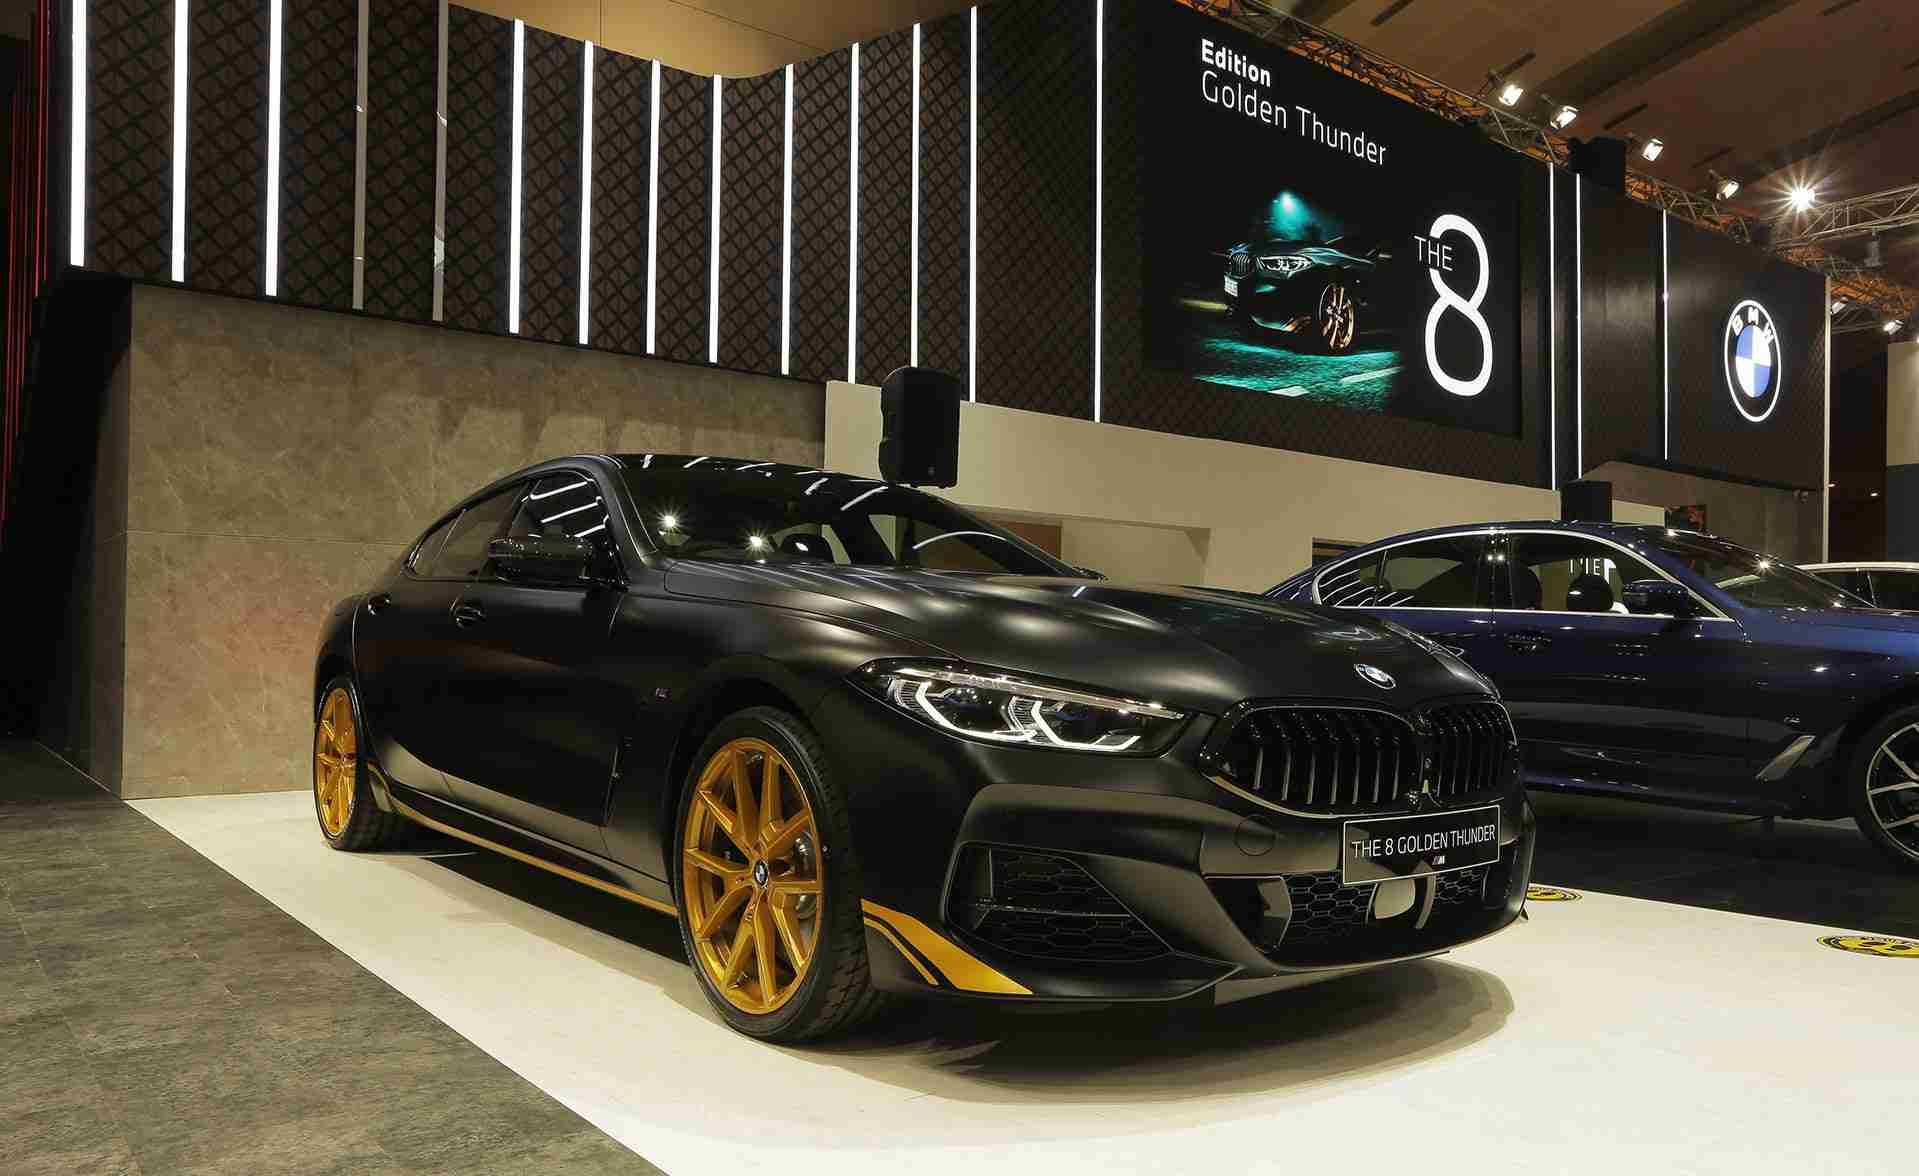 BMW 8401 Grand Coupe Golden Thunder Edition